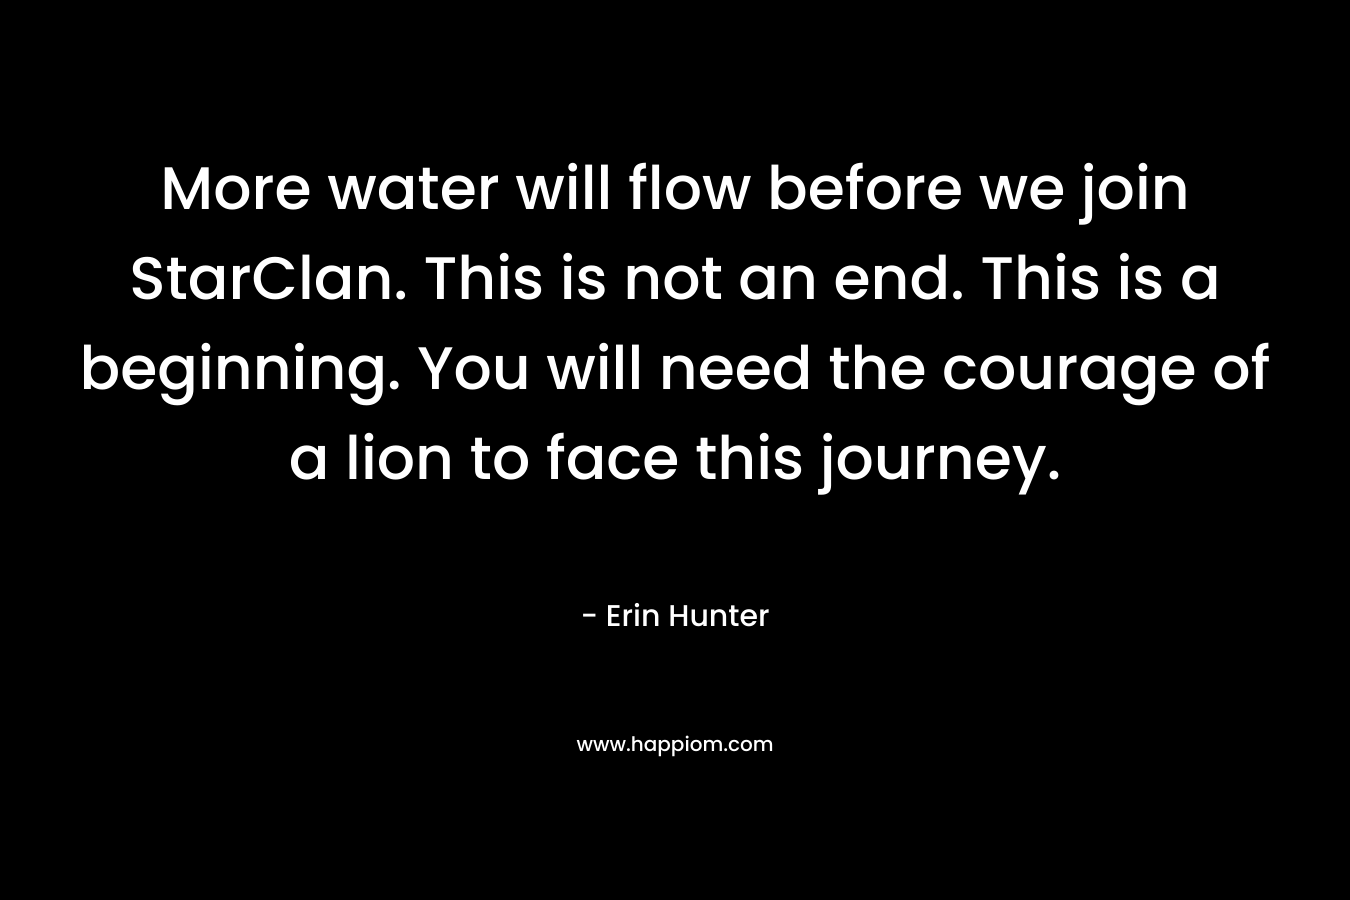 More water will flow before we join StarClan. This is not an end. This is a beginning. You will need the courage of a lion to face this journey. – Erin Hunter